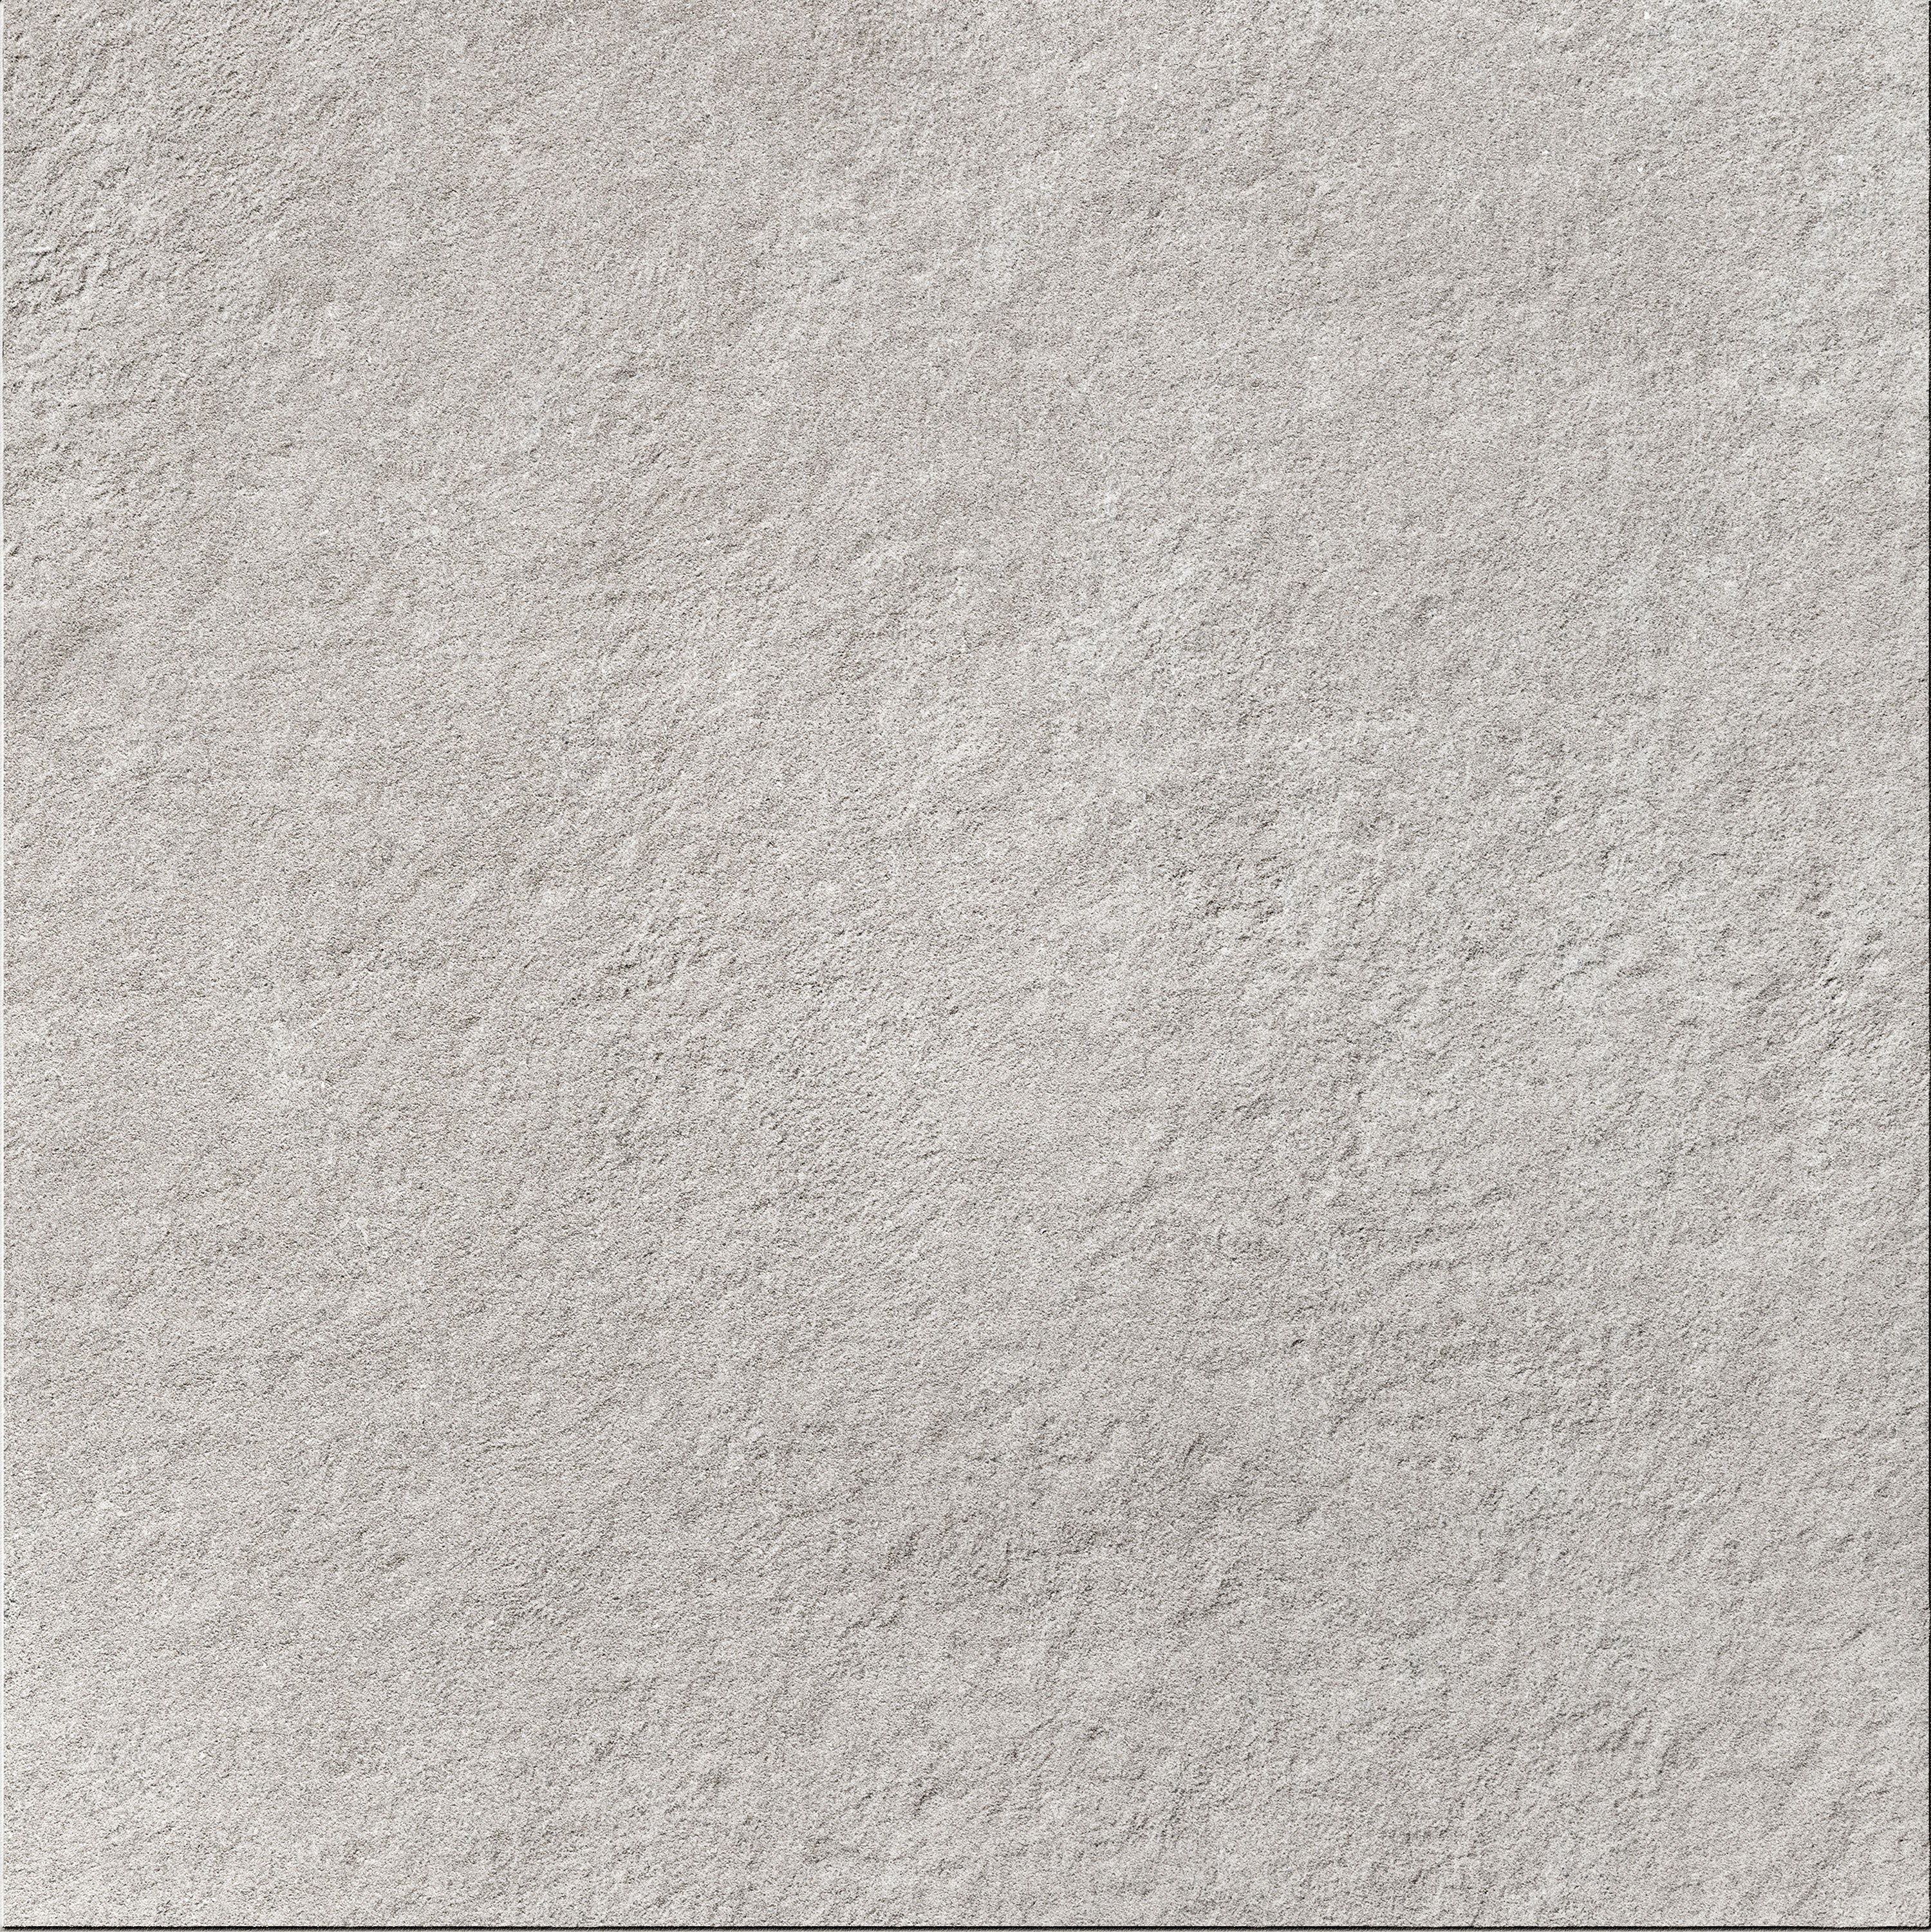 landmark frontier20 limestone indiana grey select paver tile 12x12x20mm matte rectified porcelain tile distributed by surface group international